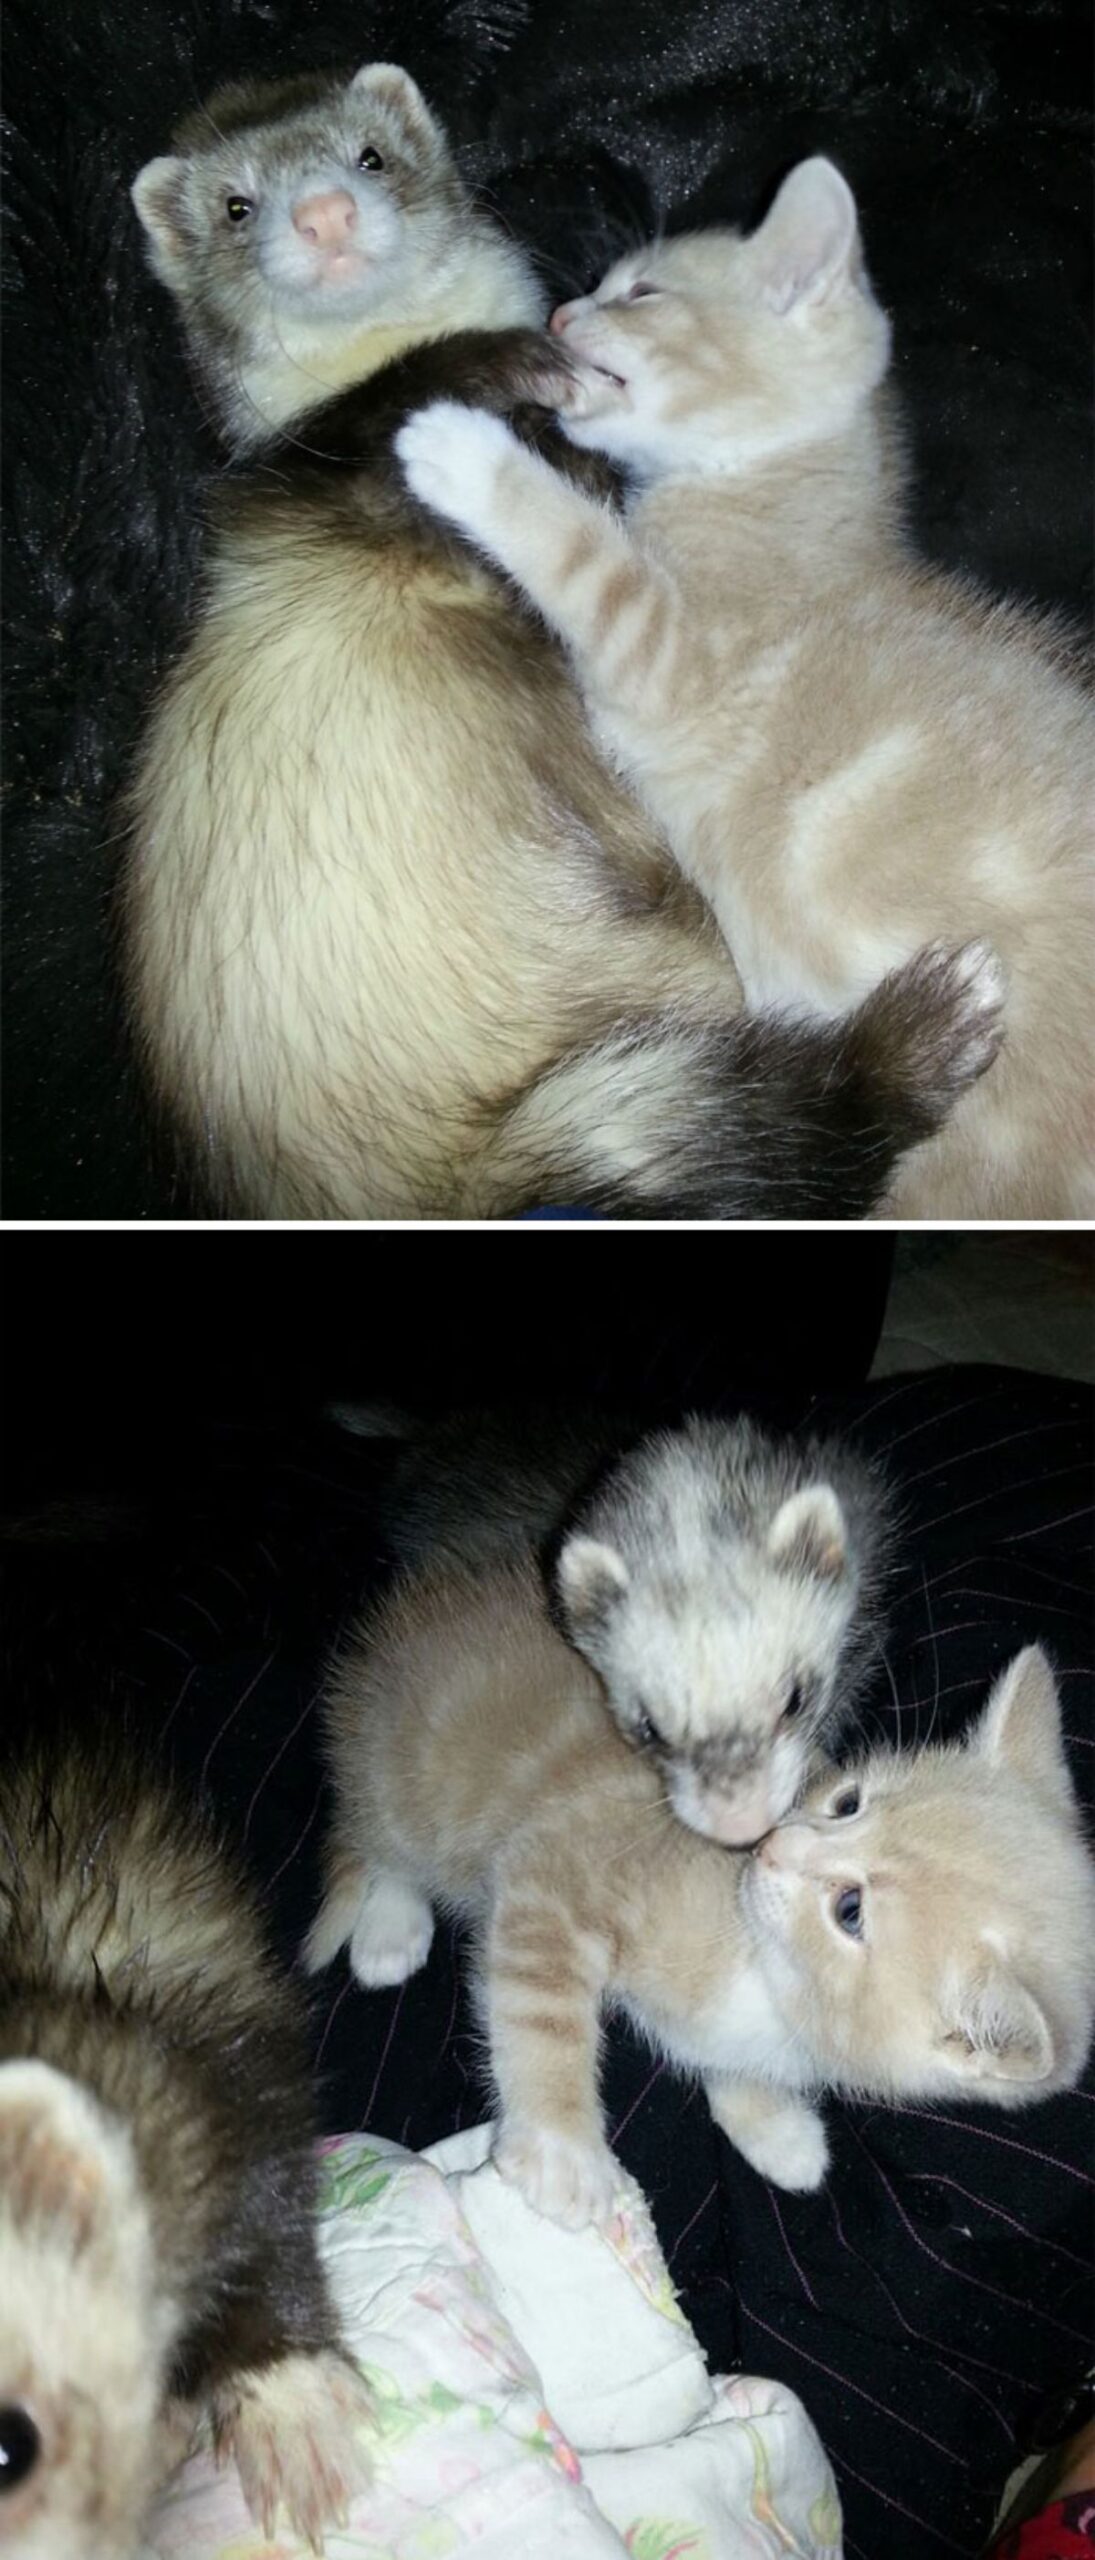 1 photo of brown ferret with one of its paws in an orange kitten's mouth and 1 photo of 2 brown and black ferrets with an orange kitten with one sniffing the kitten